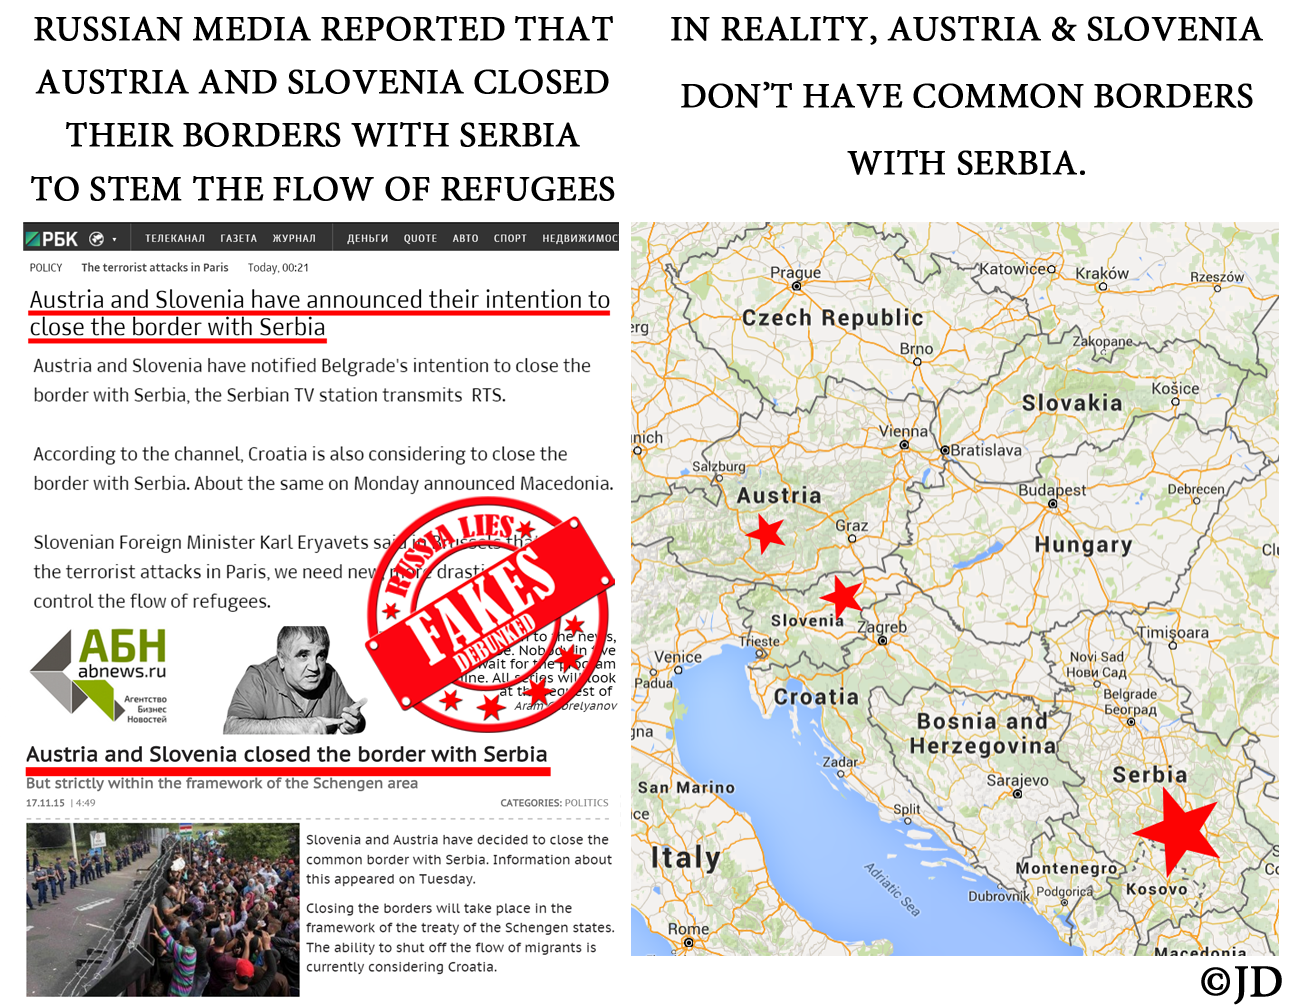 RUSSIAN-FAKE-EXPOSED-EXAMINER-RUSSIA-REFUGEES.png